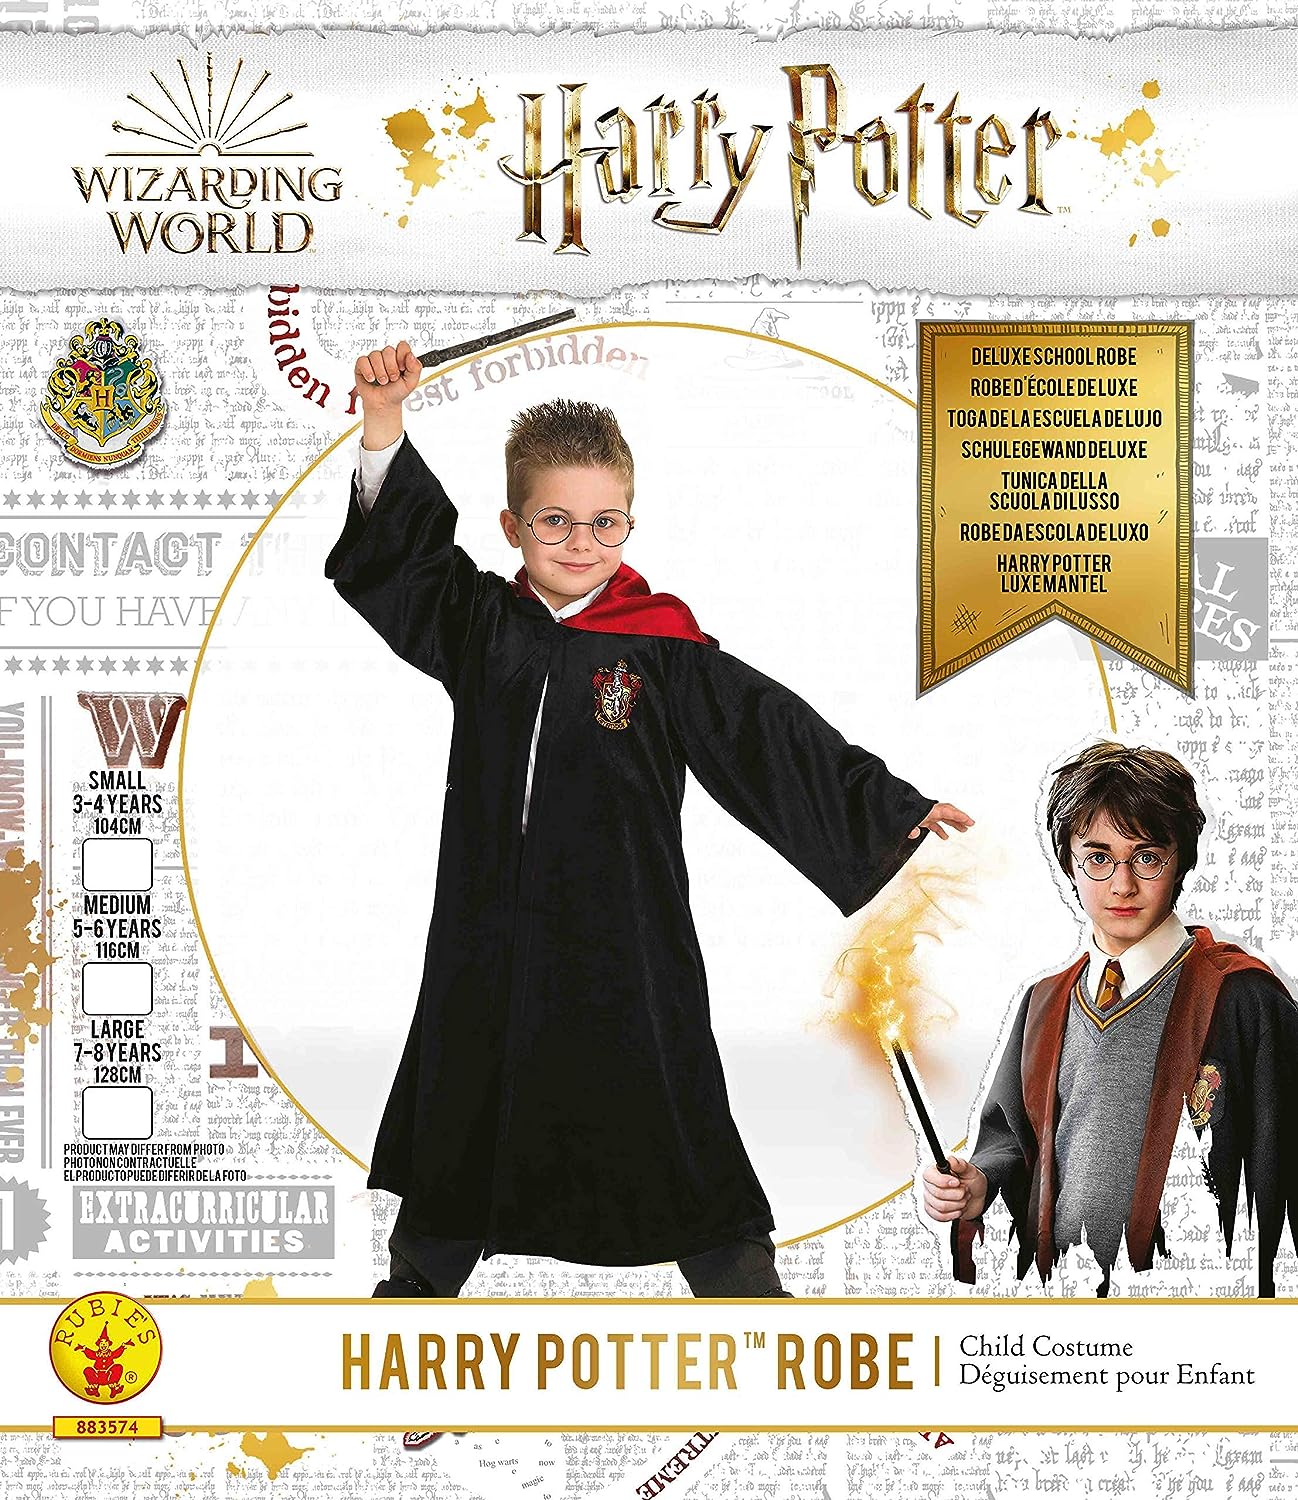 Rubies - Costume Harry Potter Deluxe, Costume per Bambini